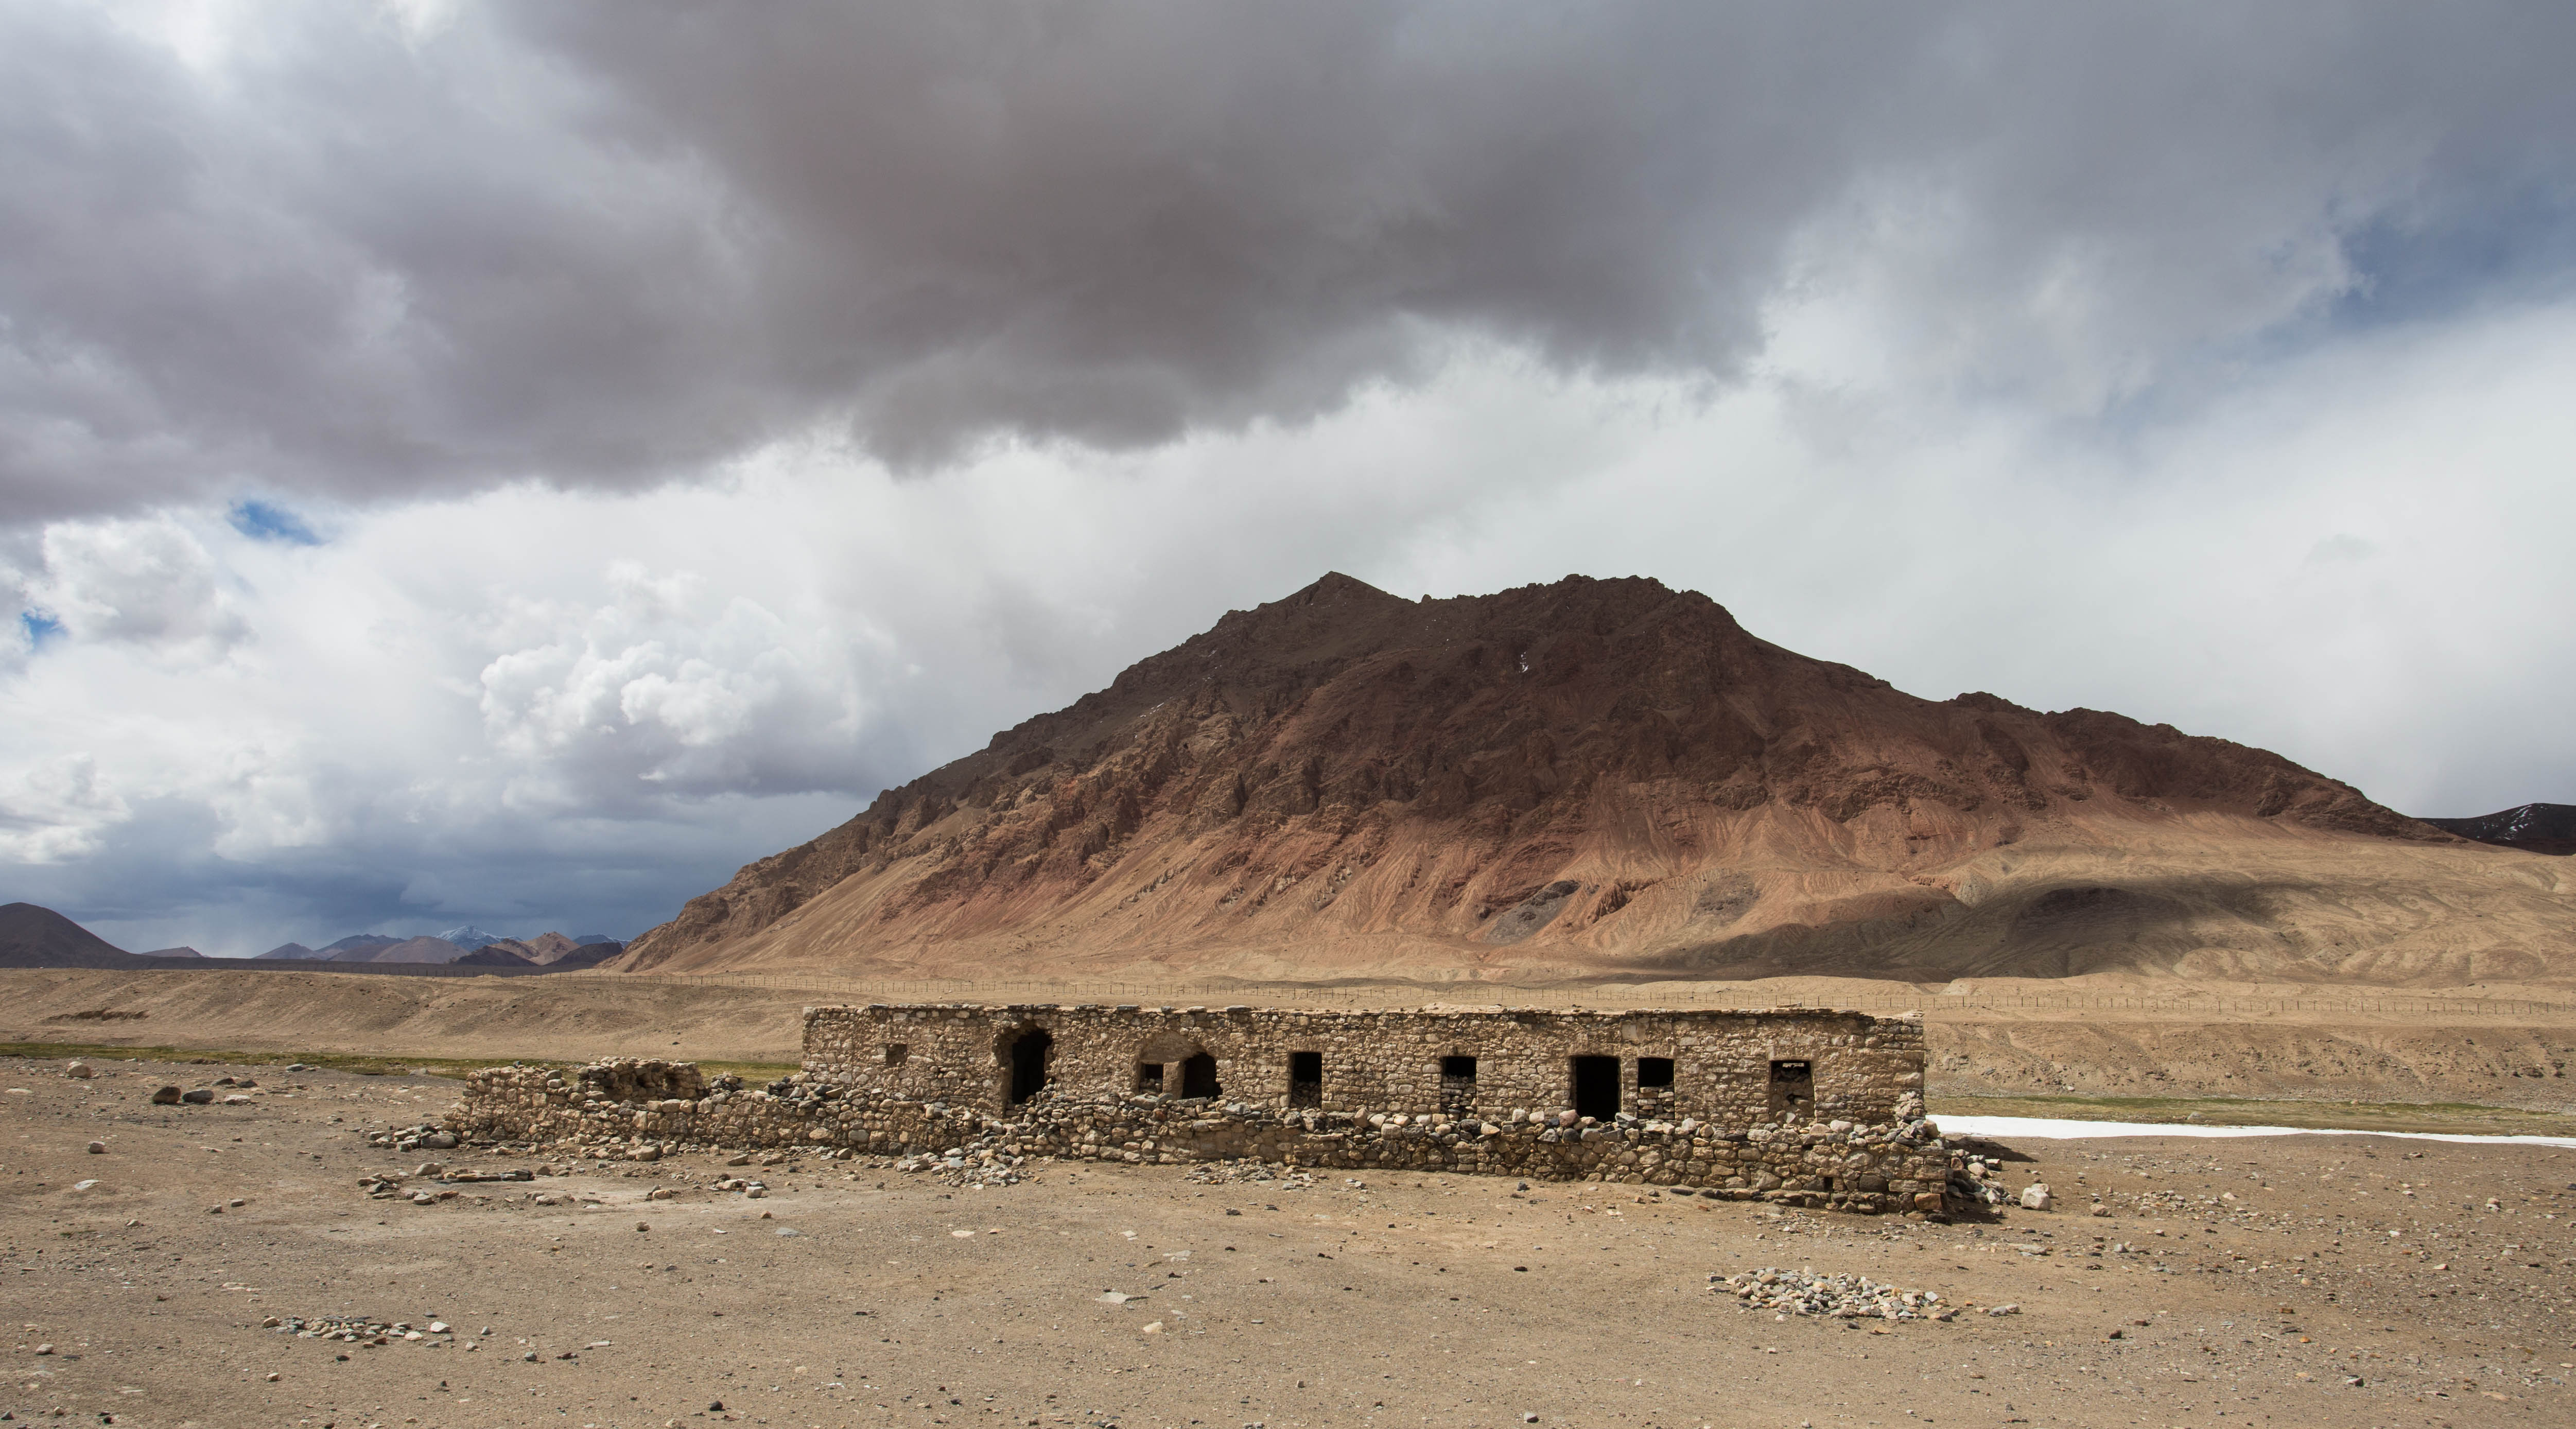 An ancient, abandoned caravanserei in the wilderness on the far side of Murghab